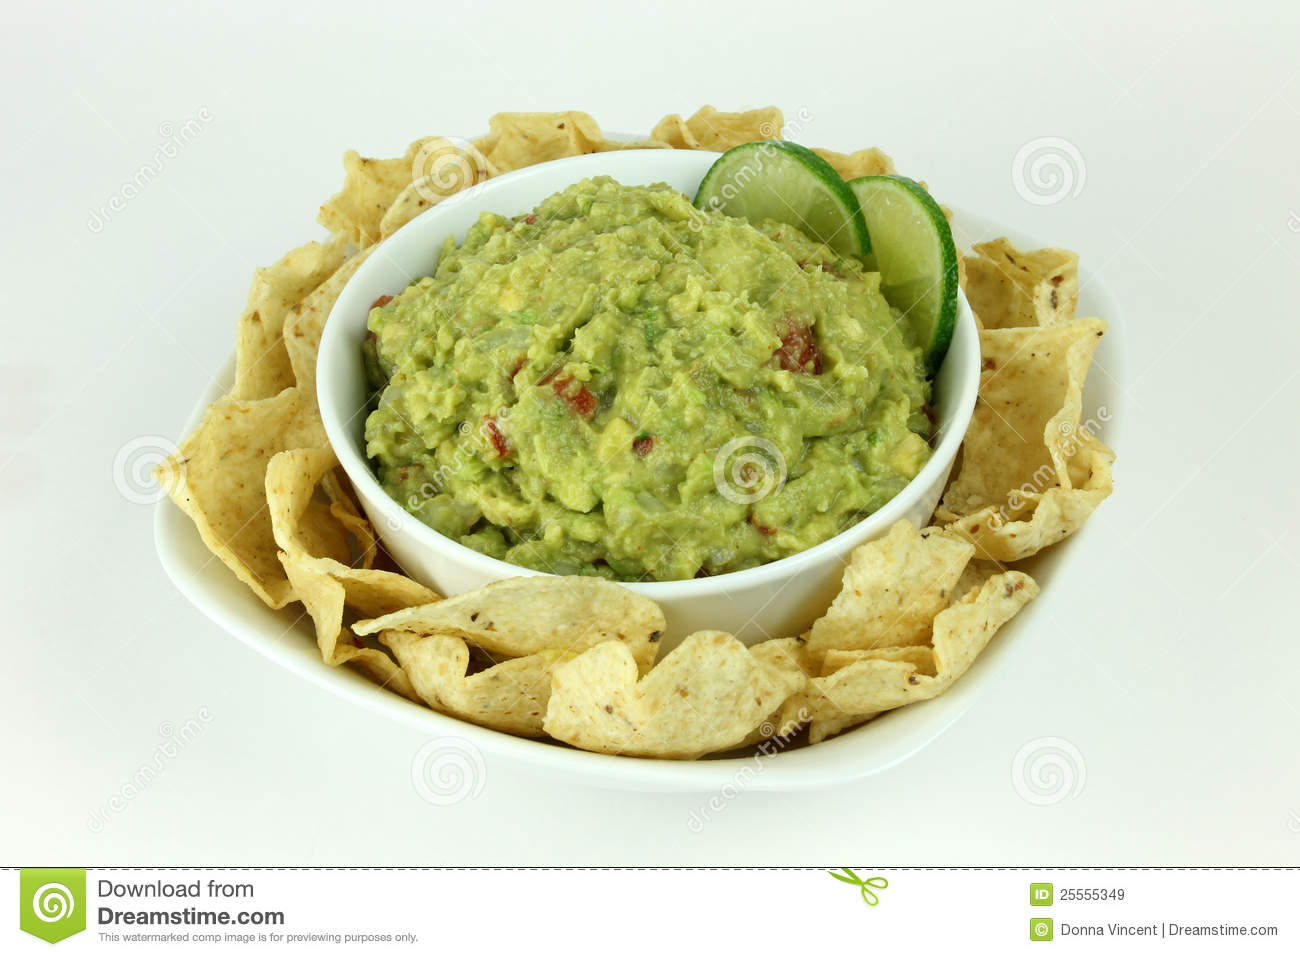 Bowl Of Guacamole With Lime Slices On A Plate Of Tortilla Chips On An